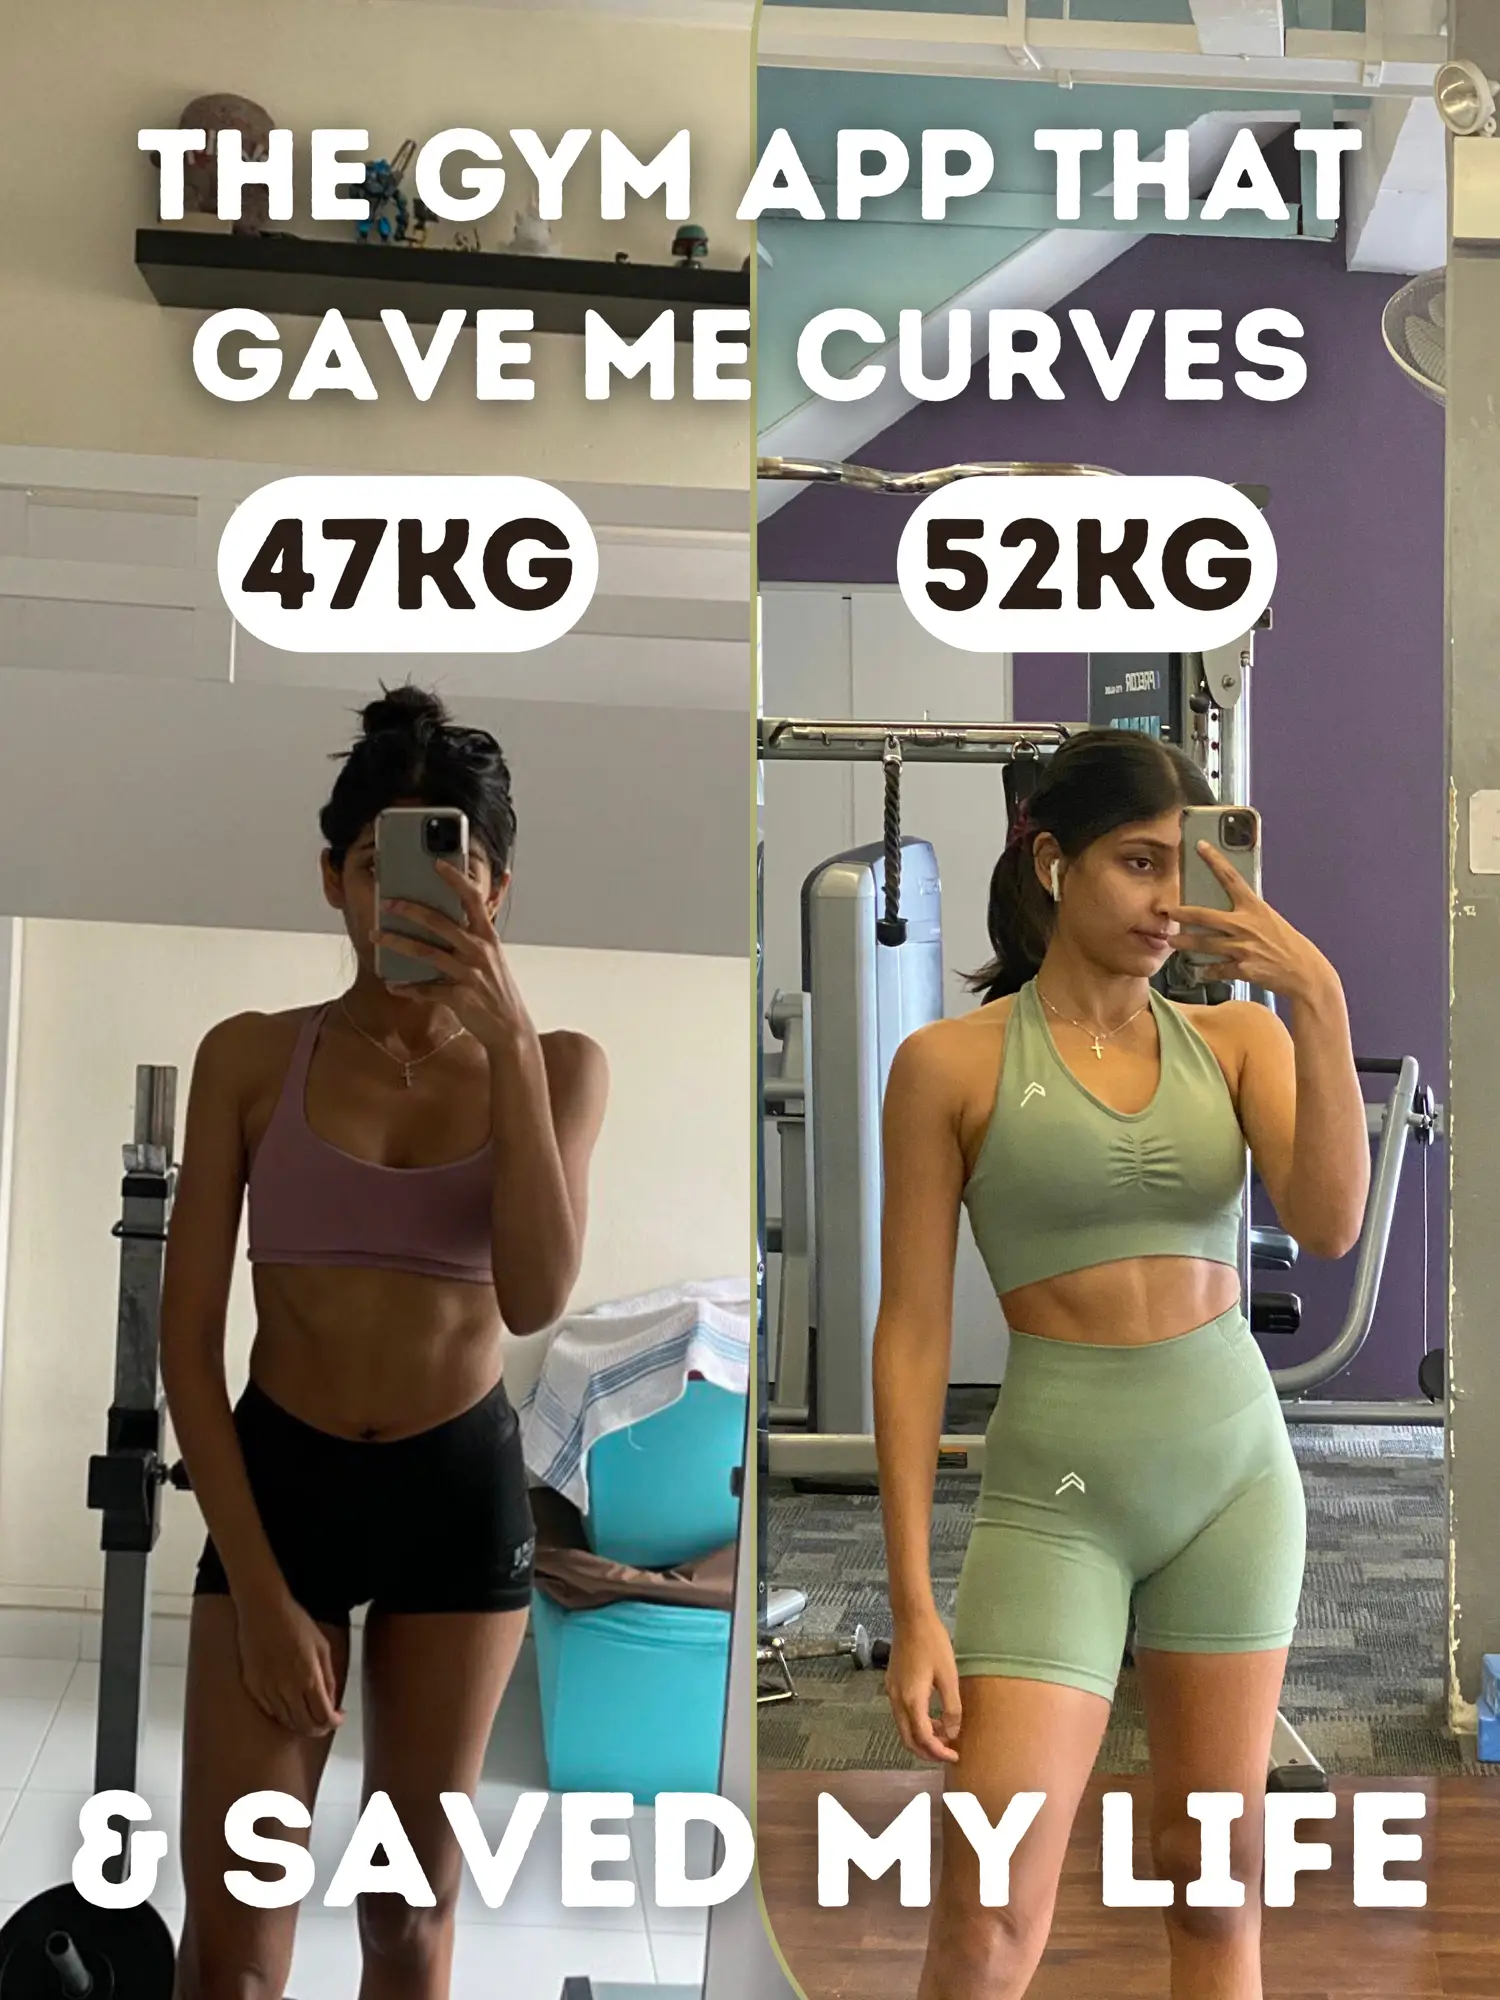 8 figure, perky butt & no diets w this gym app ✨🍑's images(0)